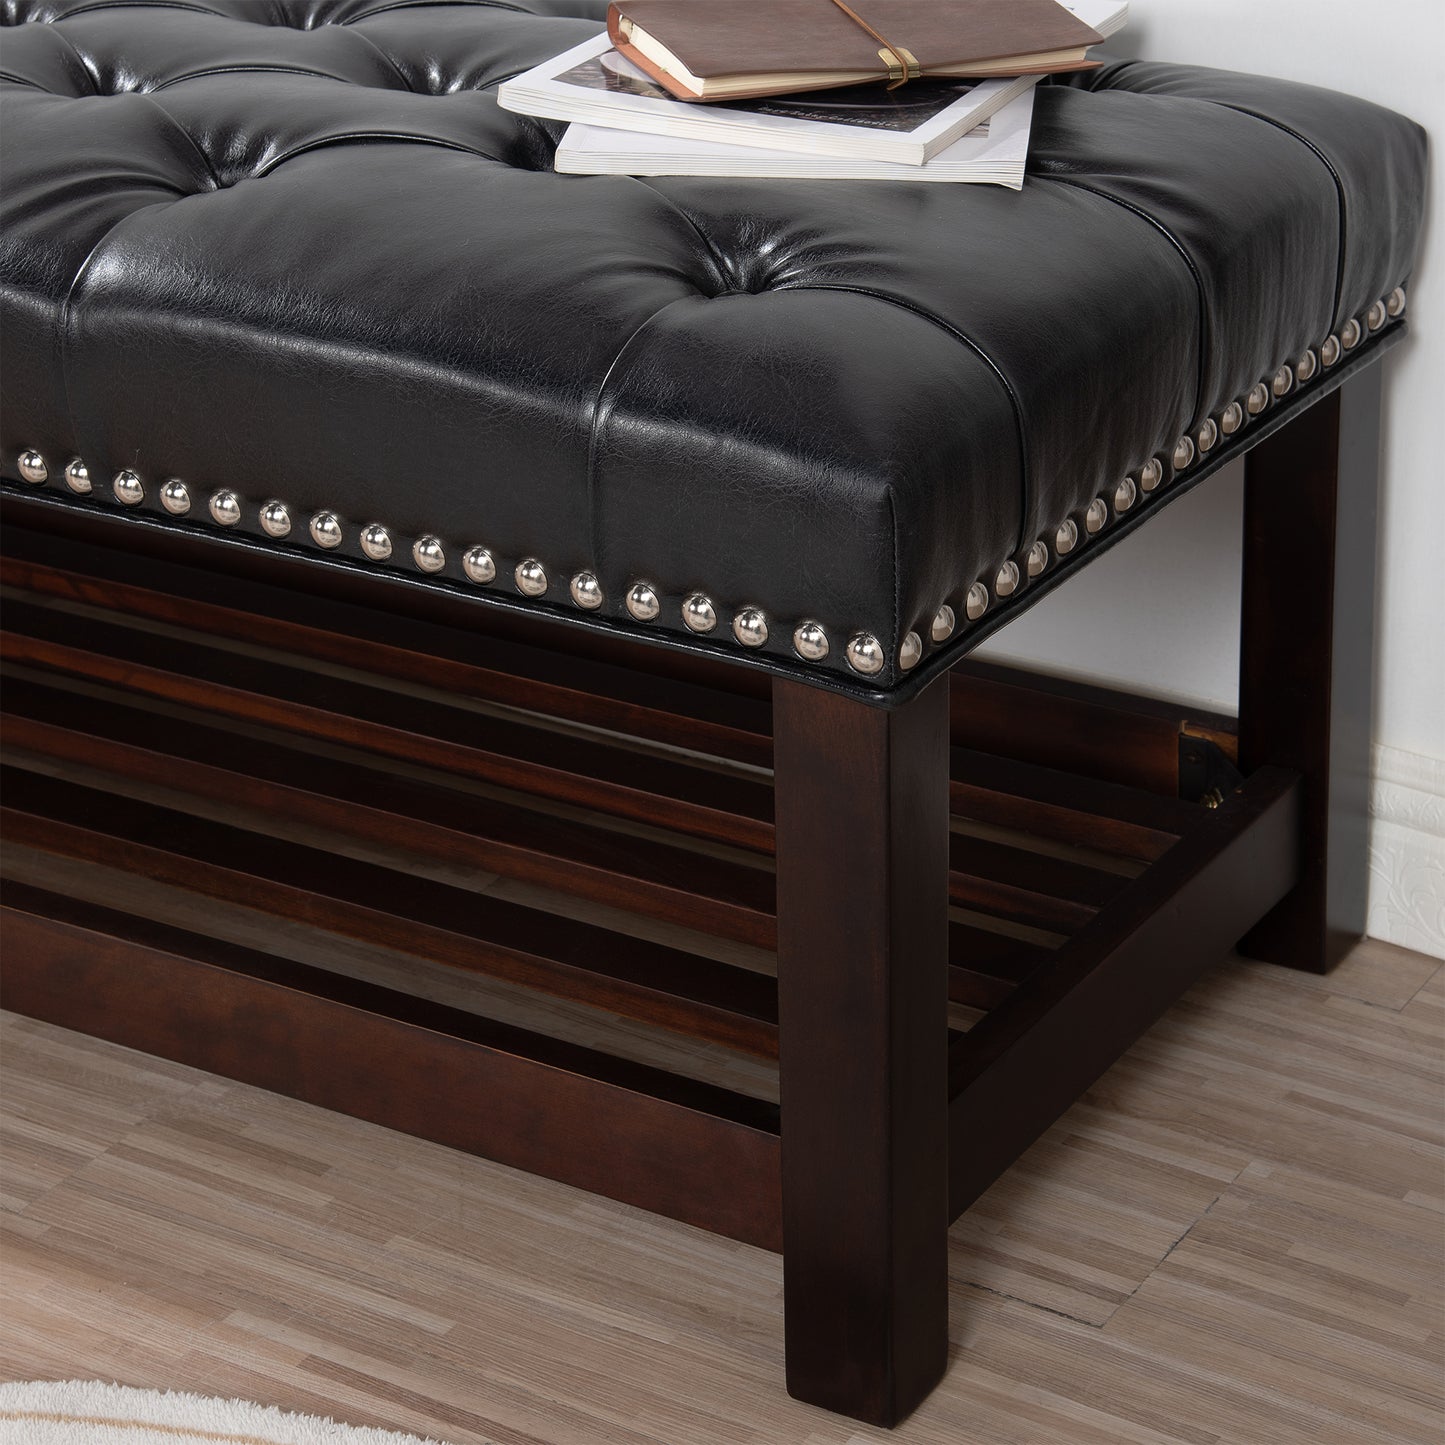 Wooden Base Upholstered Bench for Bedroom for Entryway